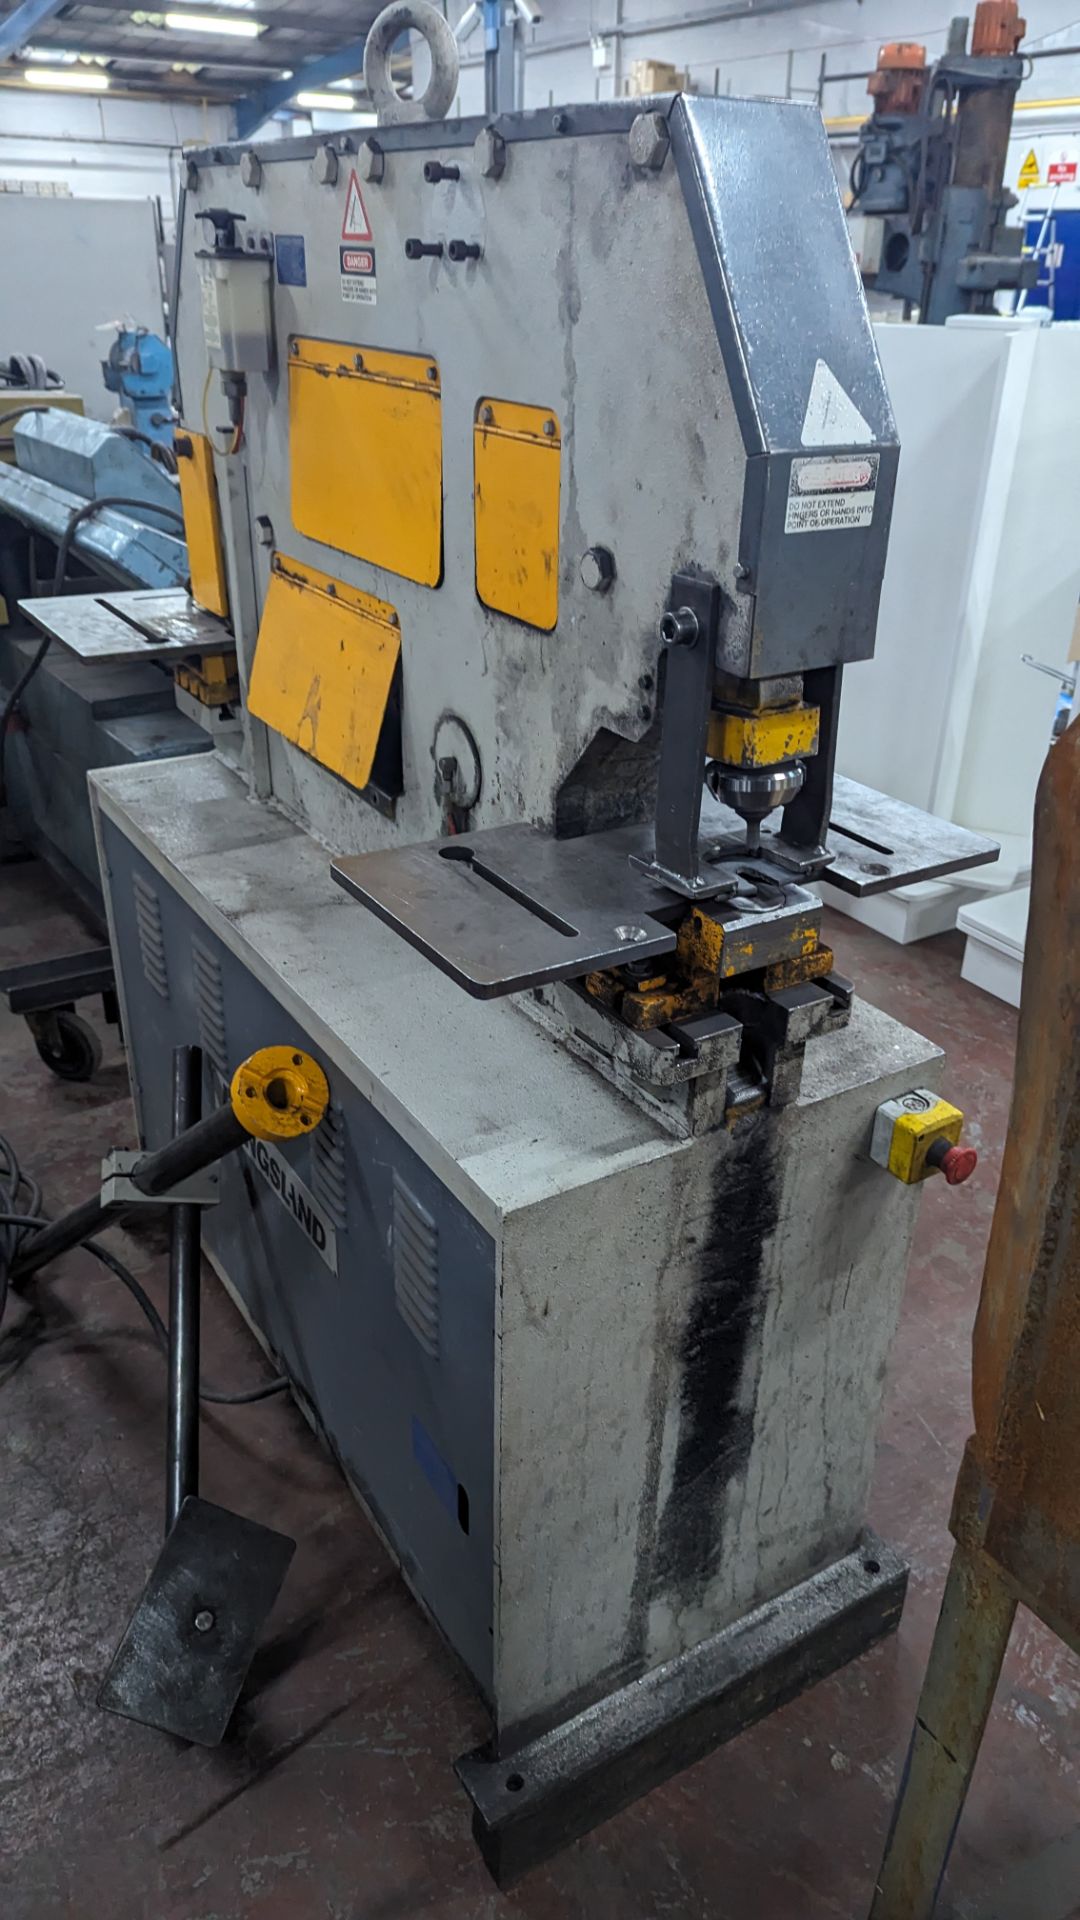 Kingsland Compact 60 hydraulic metalworker for punching, shearing, angle cutting, section cutting an - Image 13 of 22